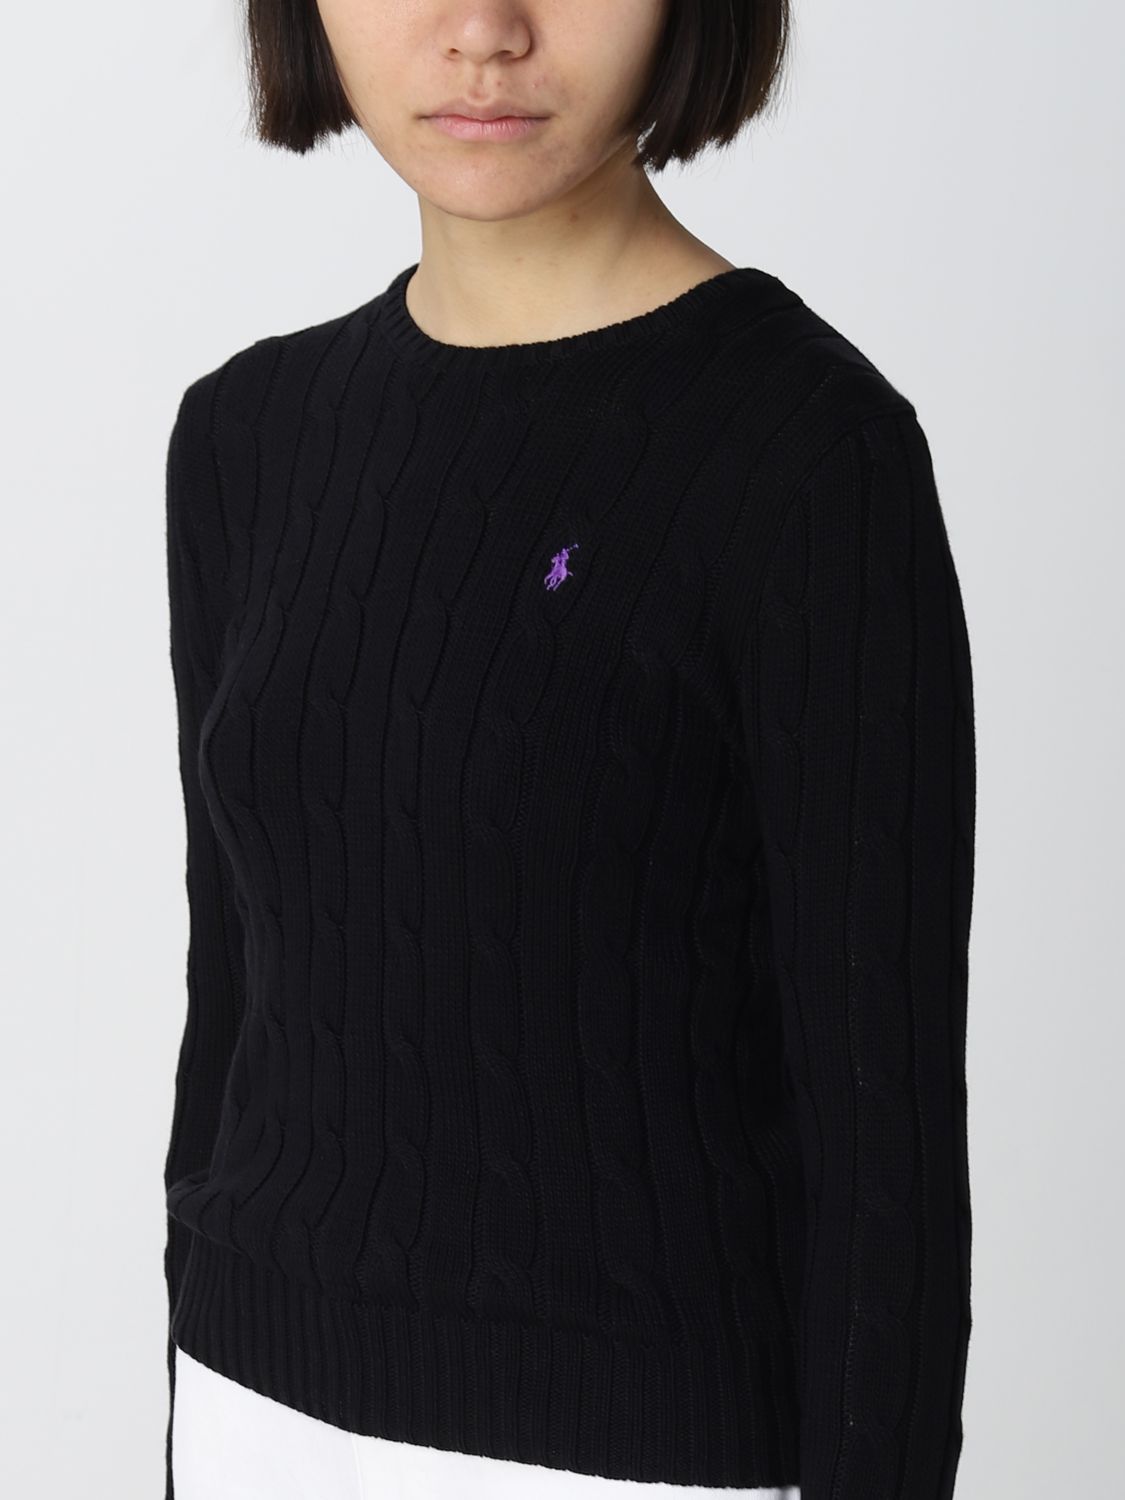 POLO RALPH LAUREN: sweater for woman - Black | Polo Ralph Lauren sweater  211891640 online on 